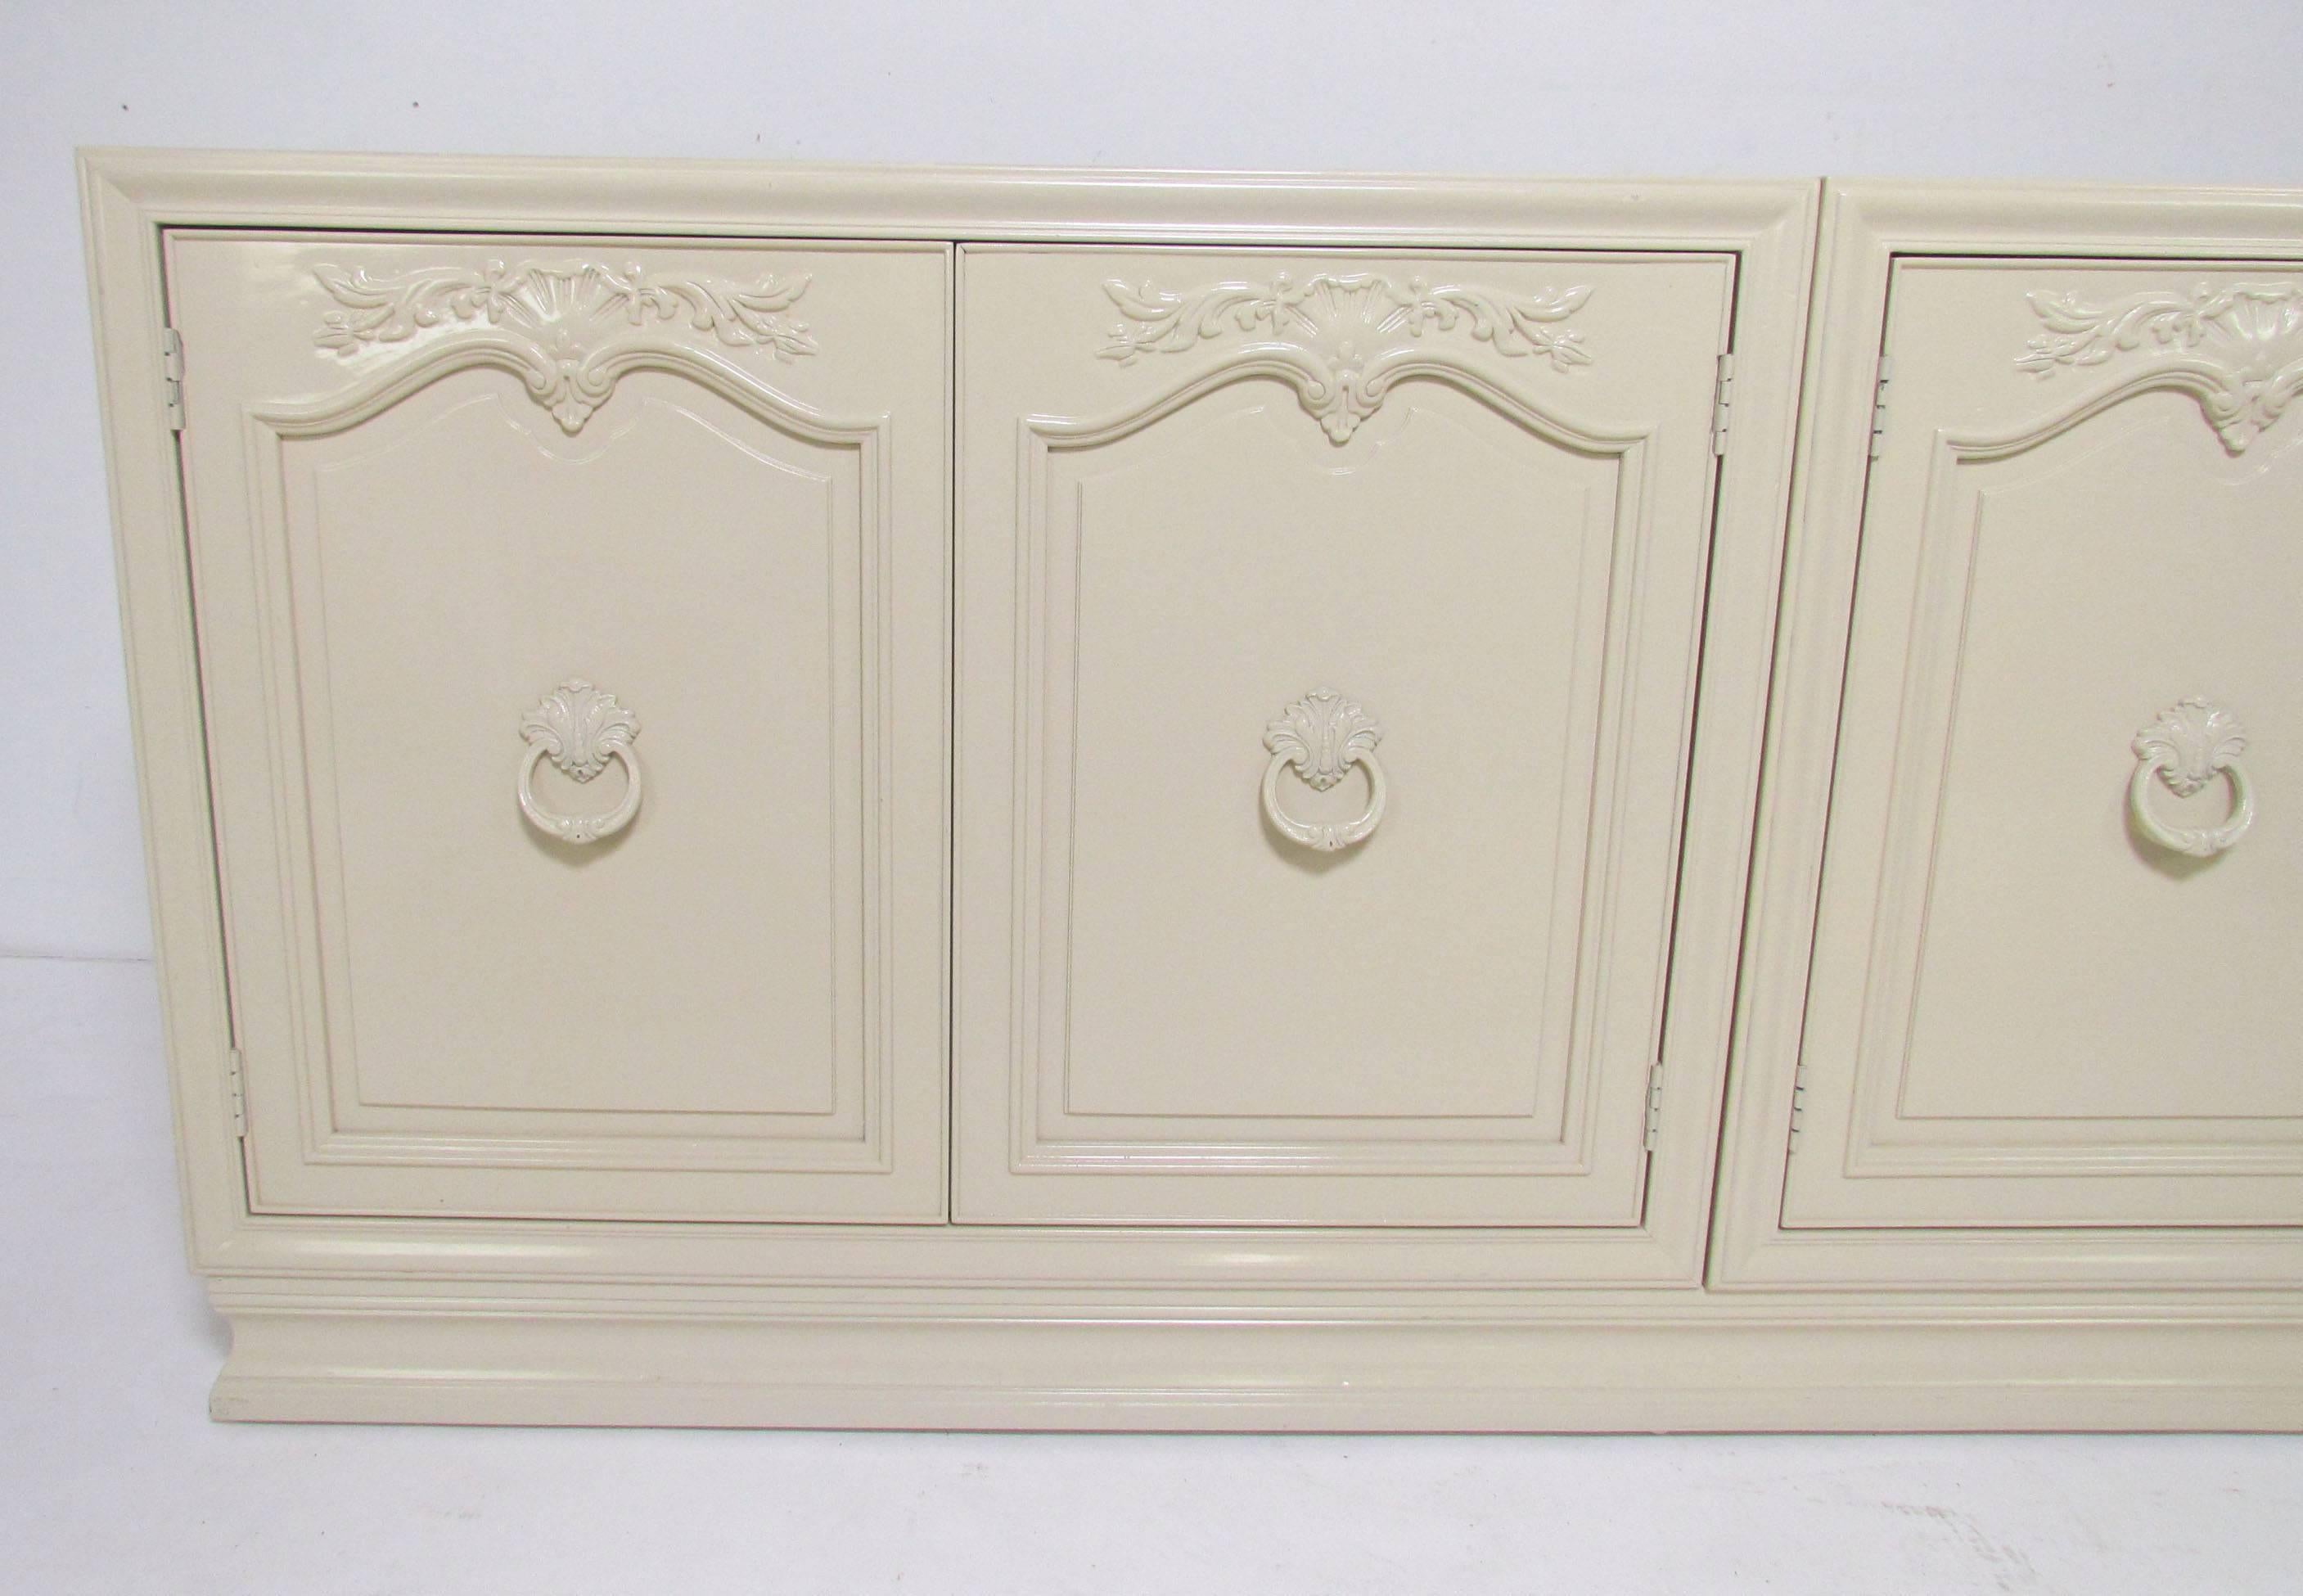 Credenza in ivory lacquer by Henredon, circa 1970s. Two matching cabinets rest side by side on a plinth base. Identical interiors feature an adjustable shelf and silverware drawers lined with anti-tarnish flannels.